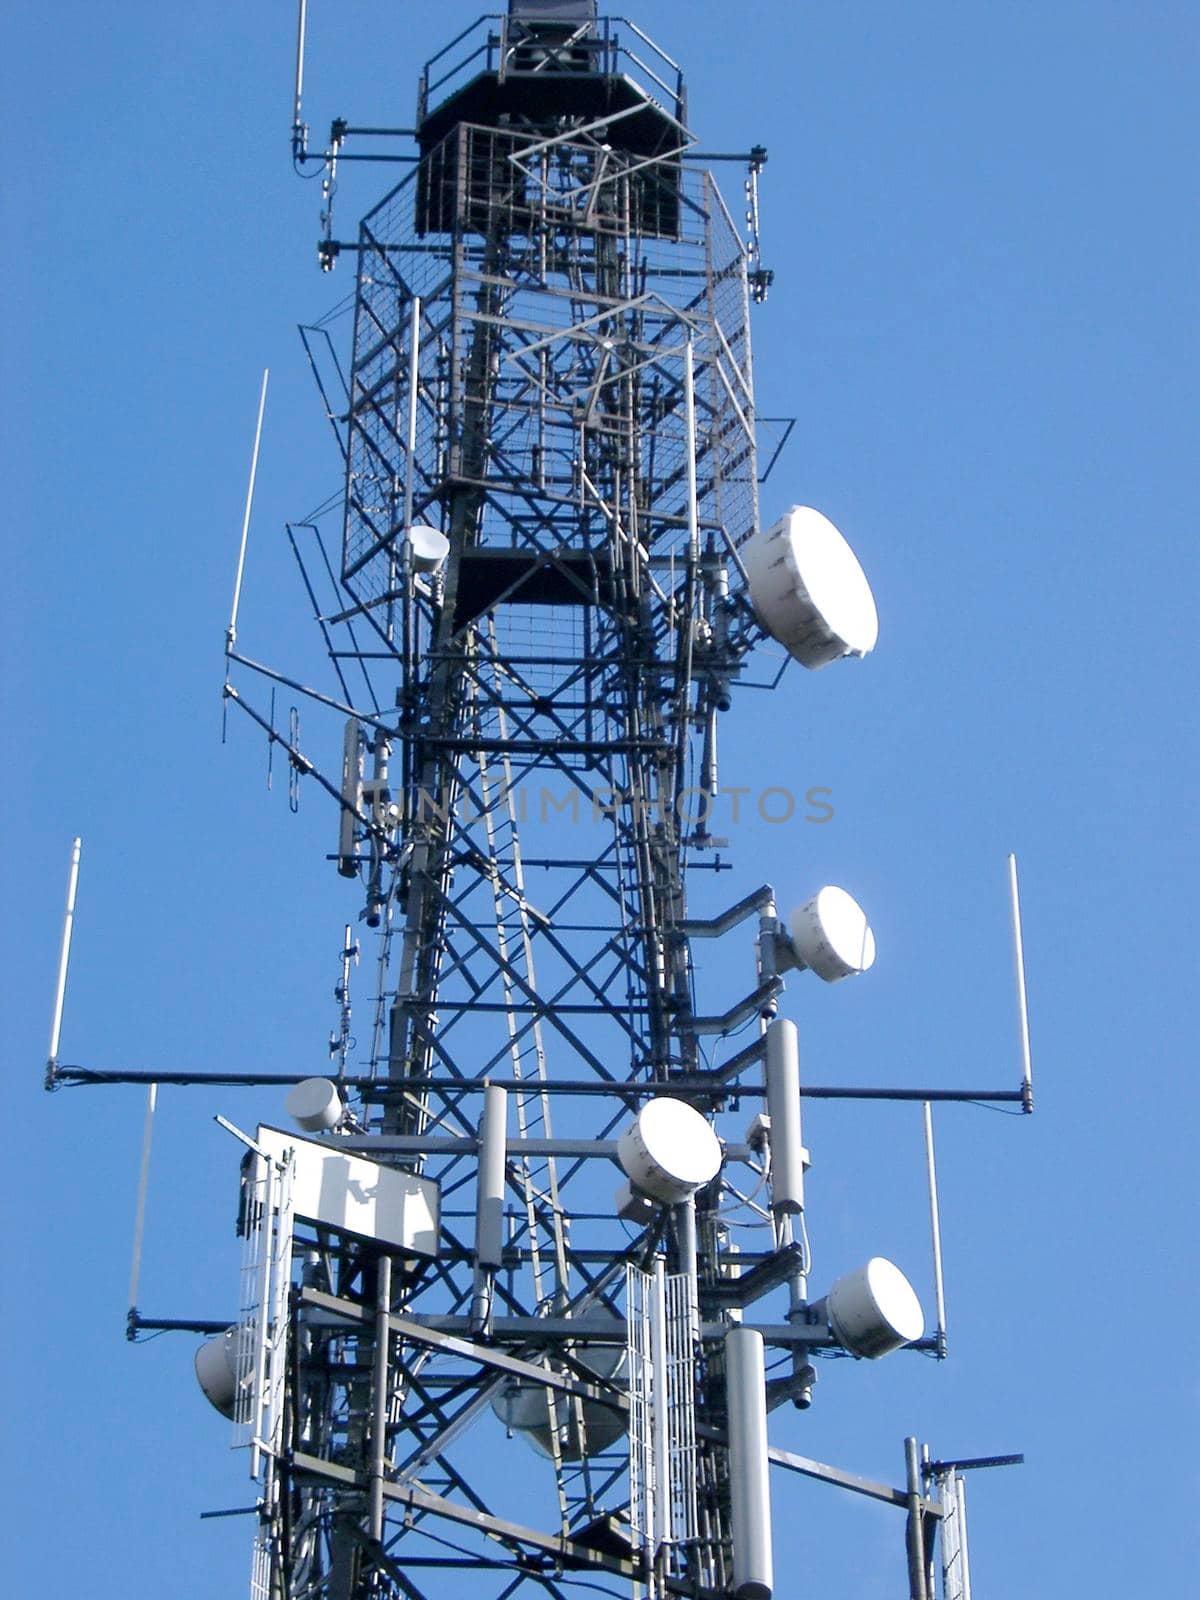 Low angle view of a steel lattice communications tower with an array of dishes for transmission and reception by sanisra